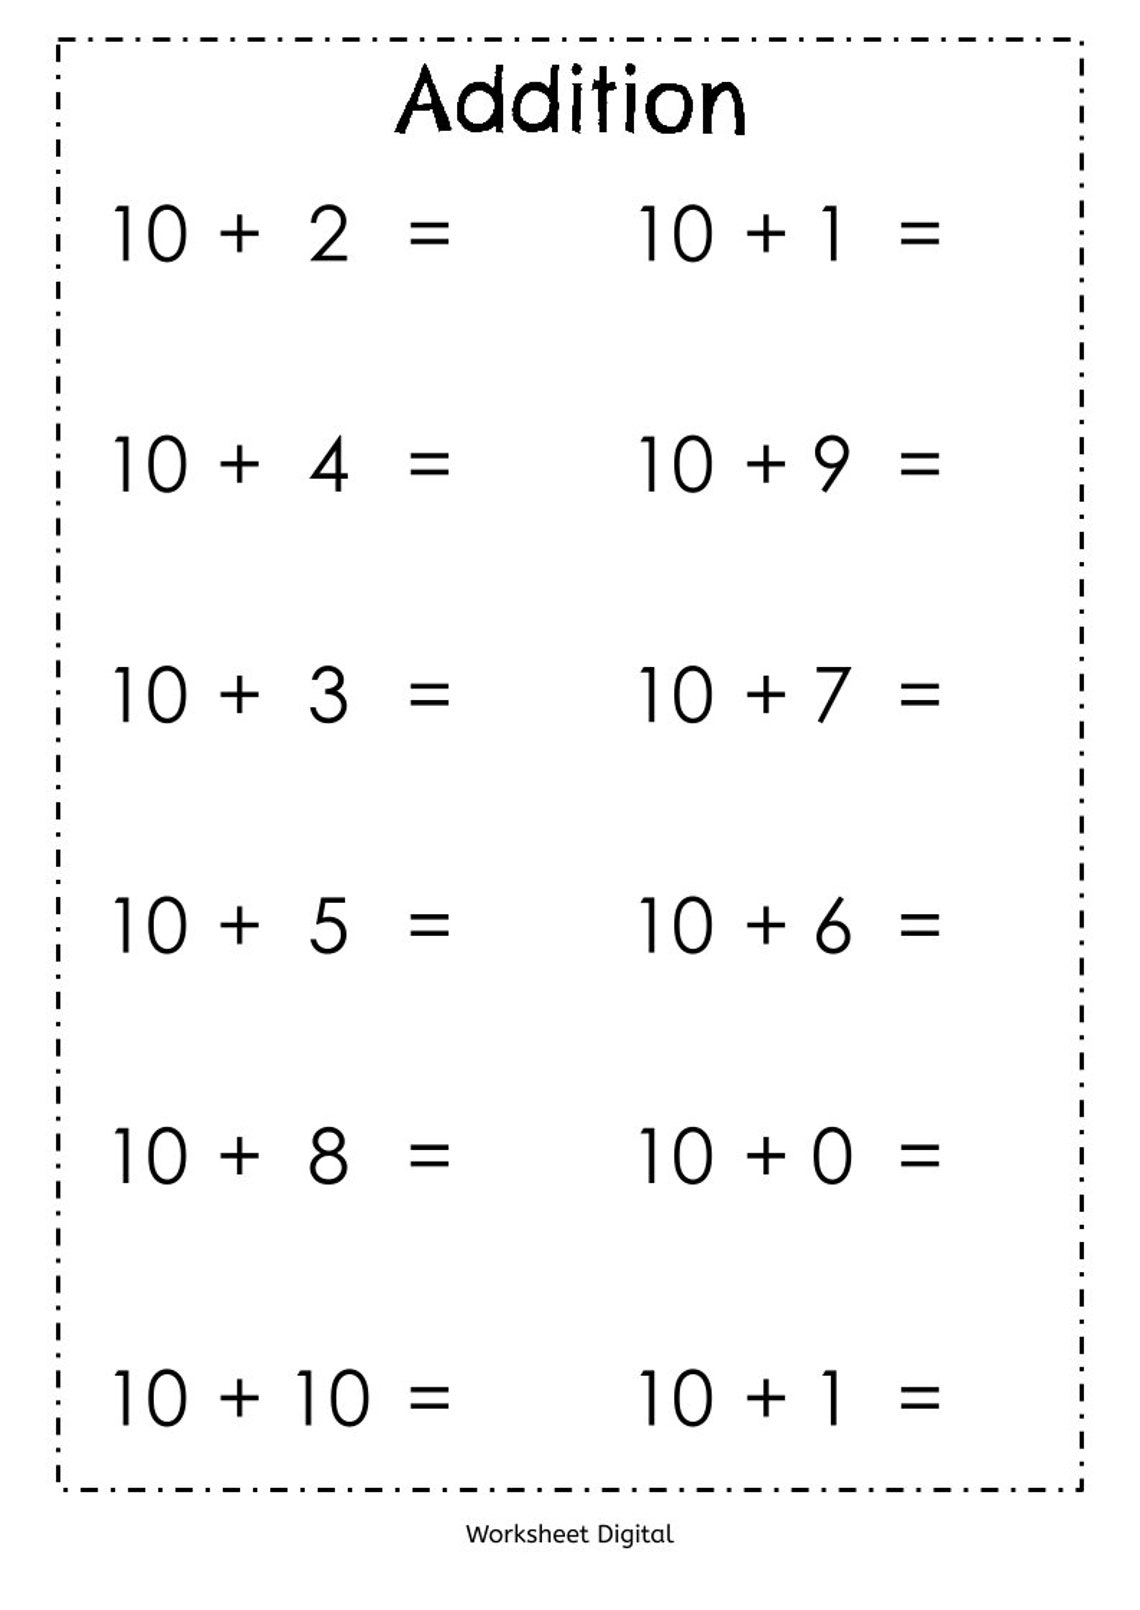 adding-two-digit-numbers-worksheets-with-regrouping-martin-lindelof